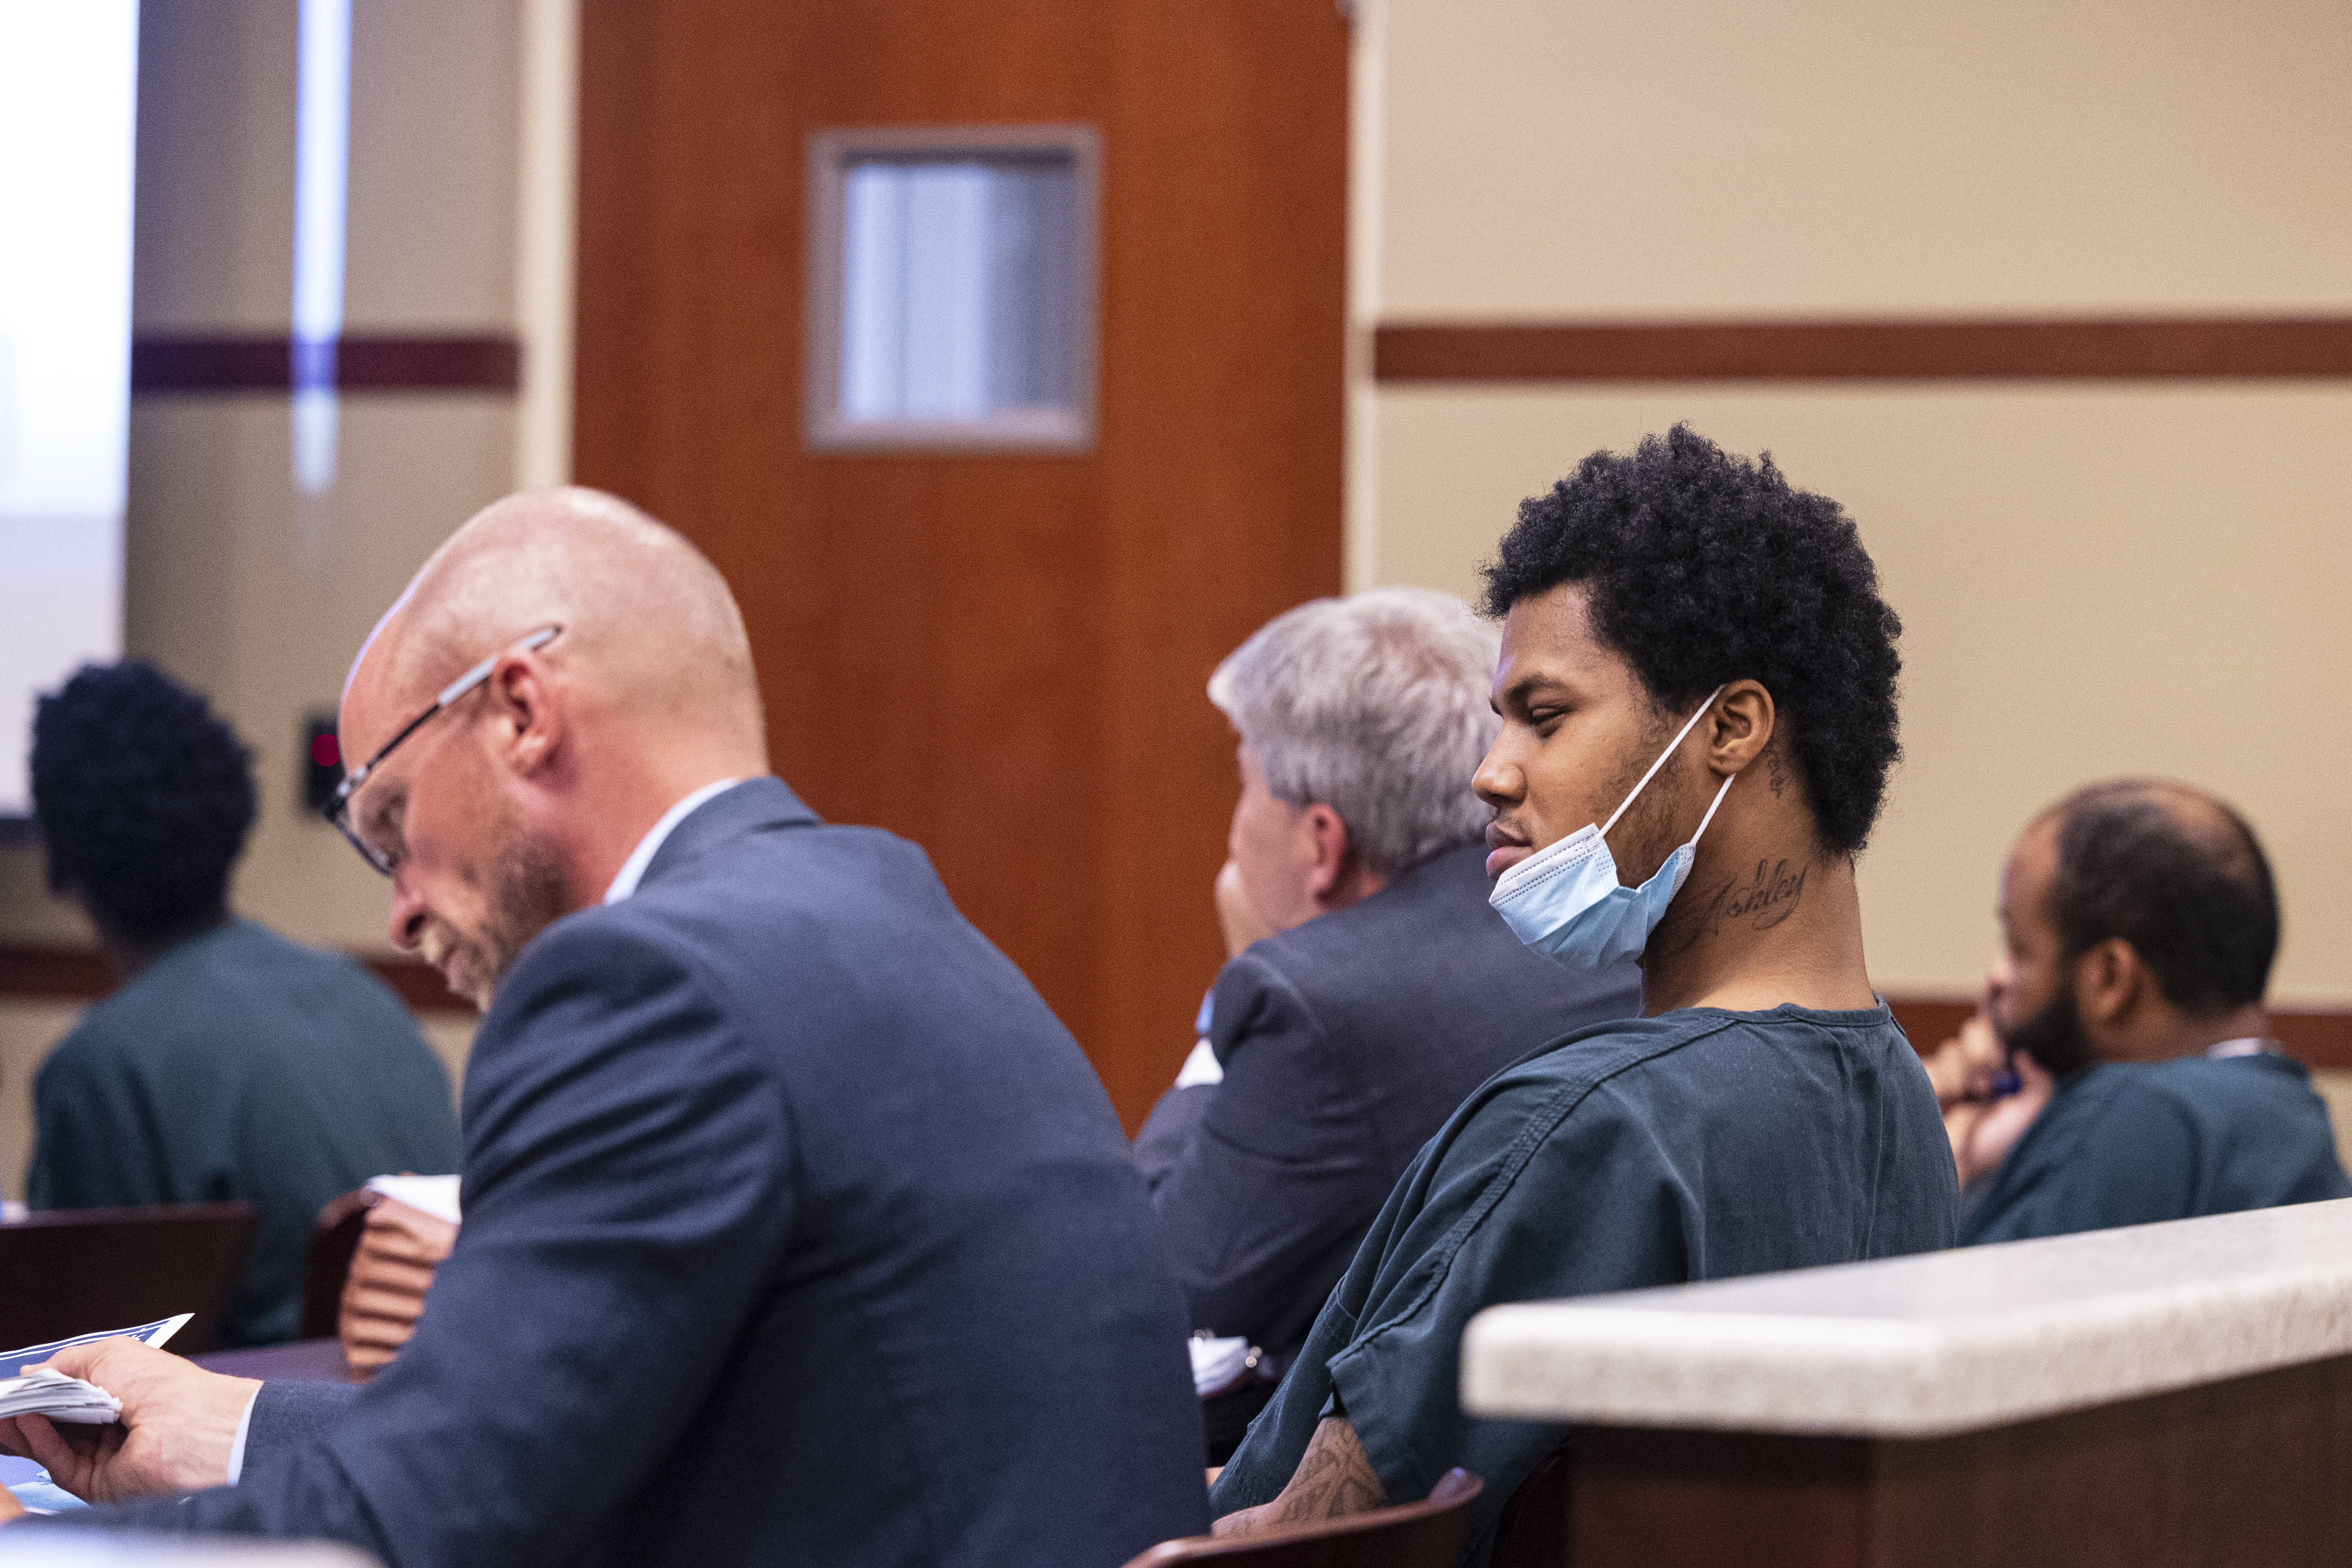 Rishy Manning, 22, appears for preliminary examination at the 63rd District Courthouse in Grand Rapids, Michigan on Thursday, June 30, 2022. The trio of defendants appeared in court, (not pictured Javonte Rosa, 23 and Jaheim Hayes—Goree, 20) are charged with felony murder in the shooting death of Joseph Wilder, 50, who was shot and killed during a robbery attempt at a Huntington Bank ATM on South Division Avenue in May of 2022. (Joel Bissell | MLive.com)